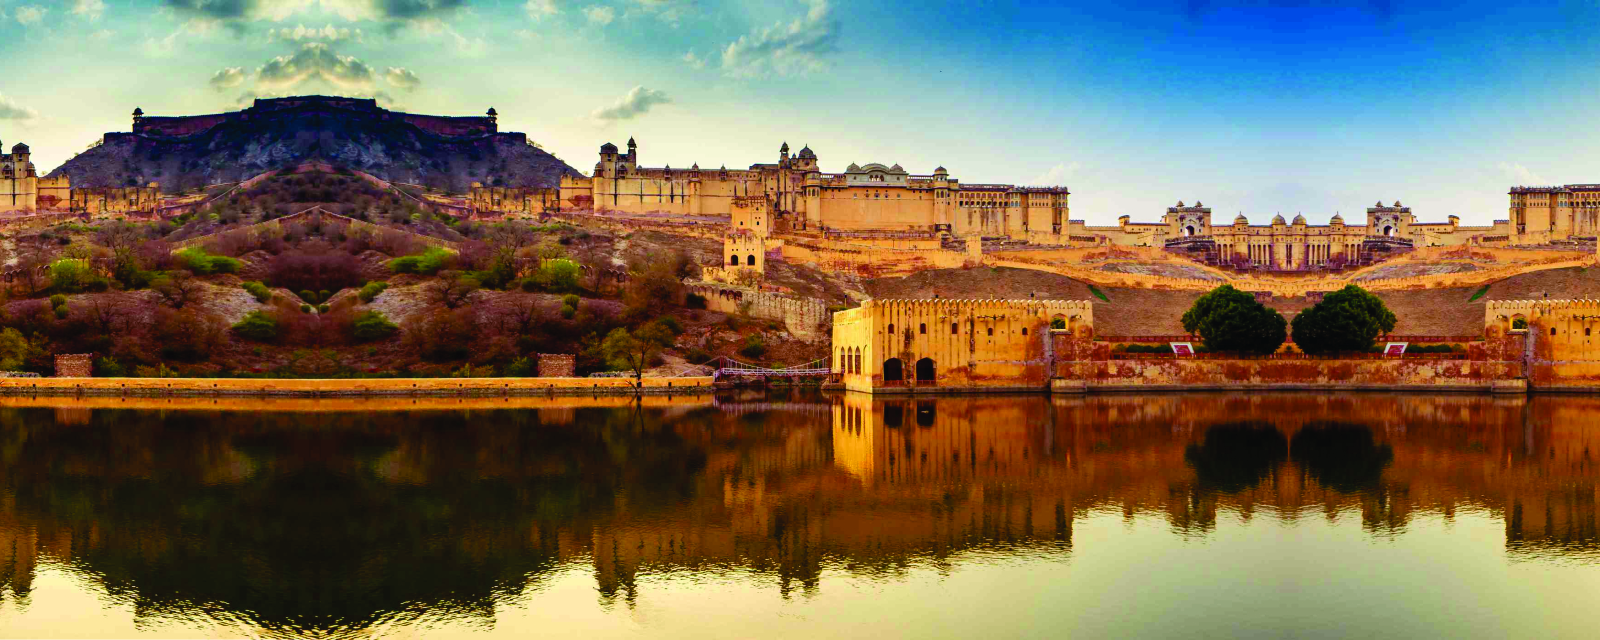 Rajasthan, Enjoy the Colors of Royalty